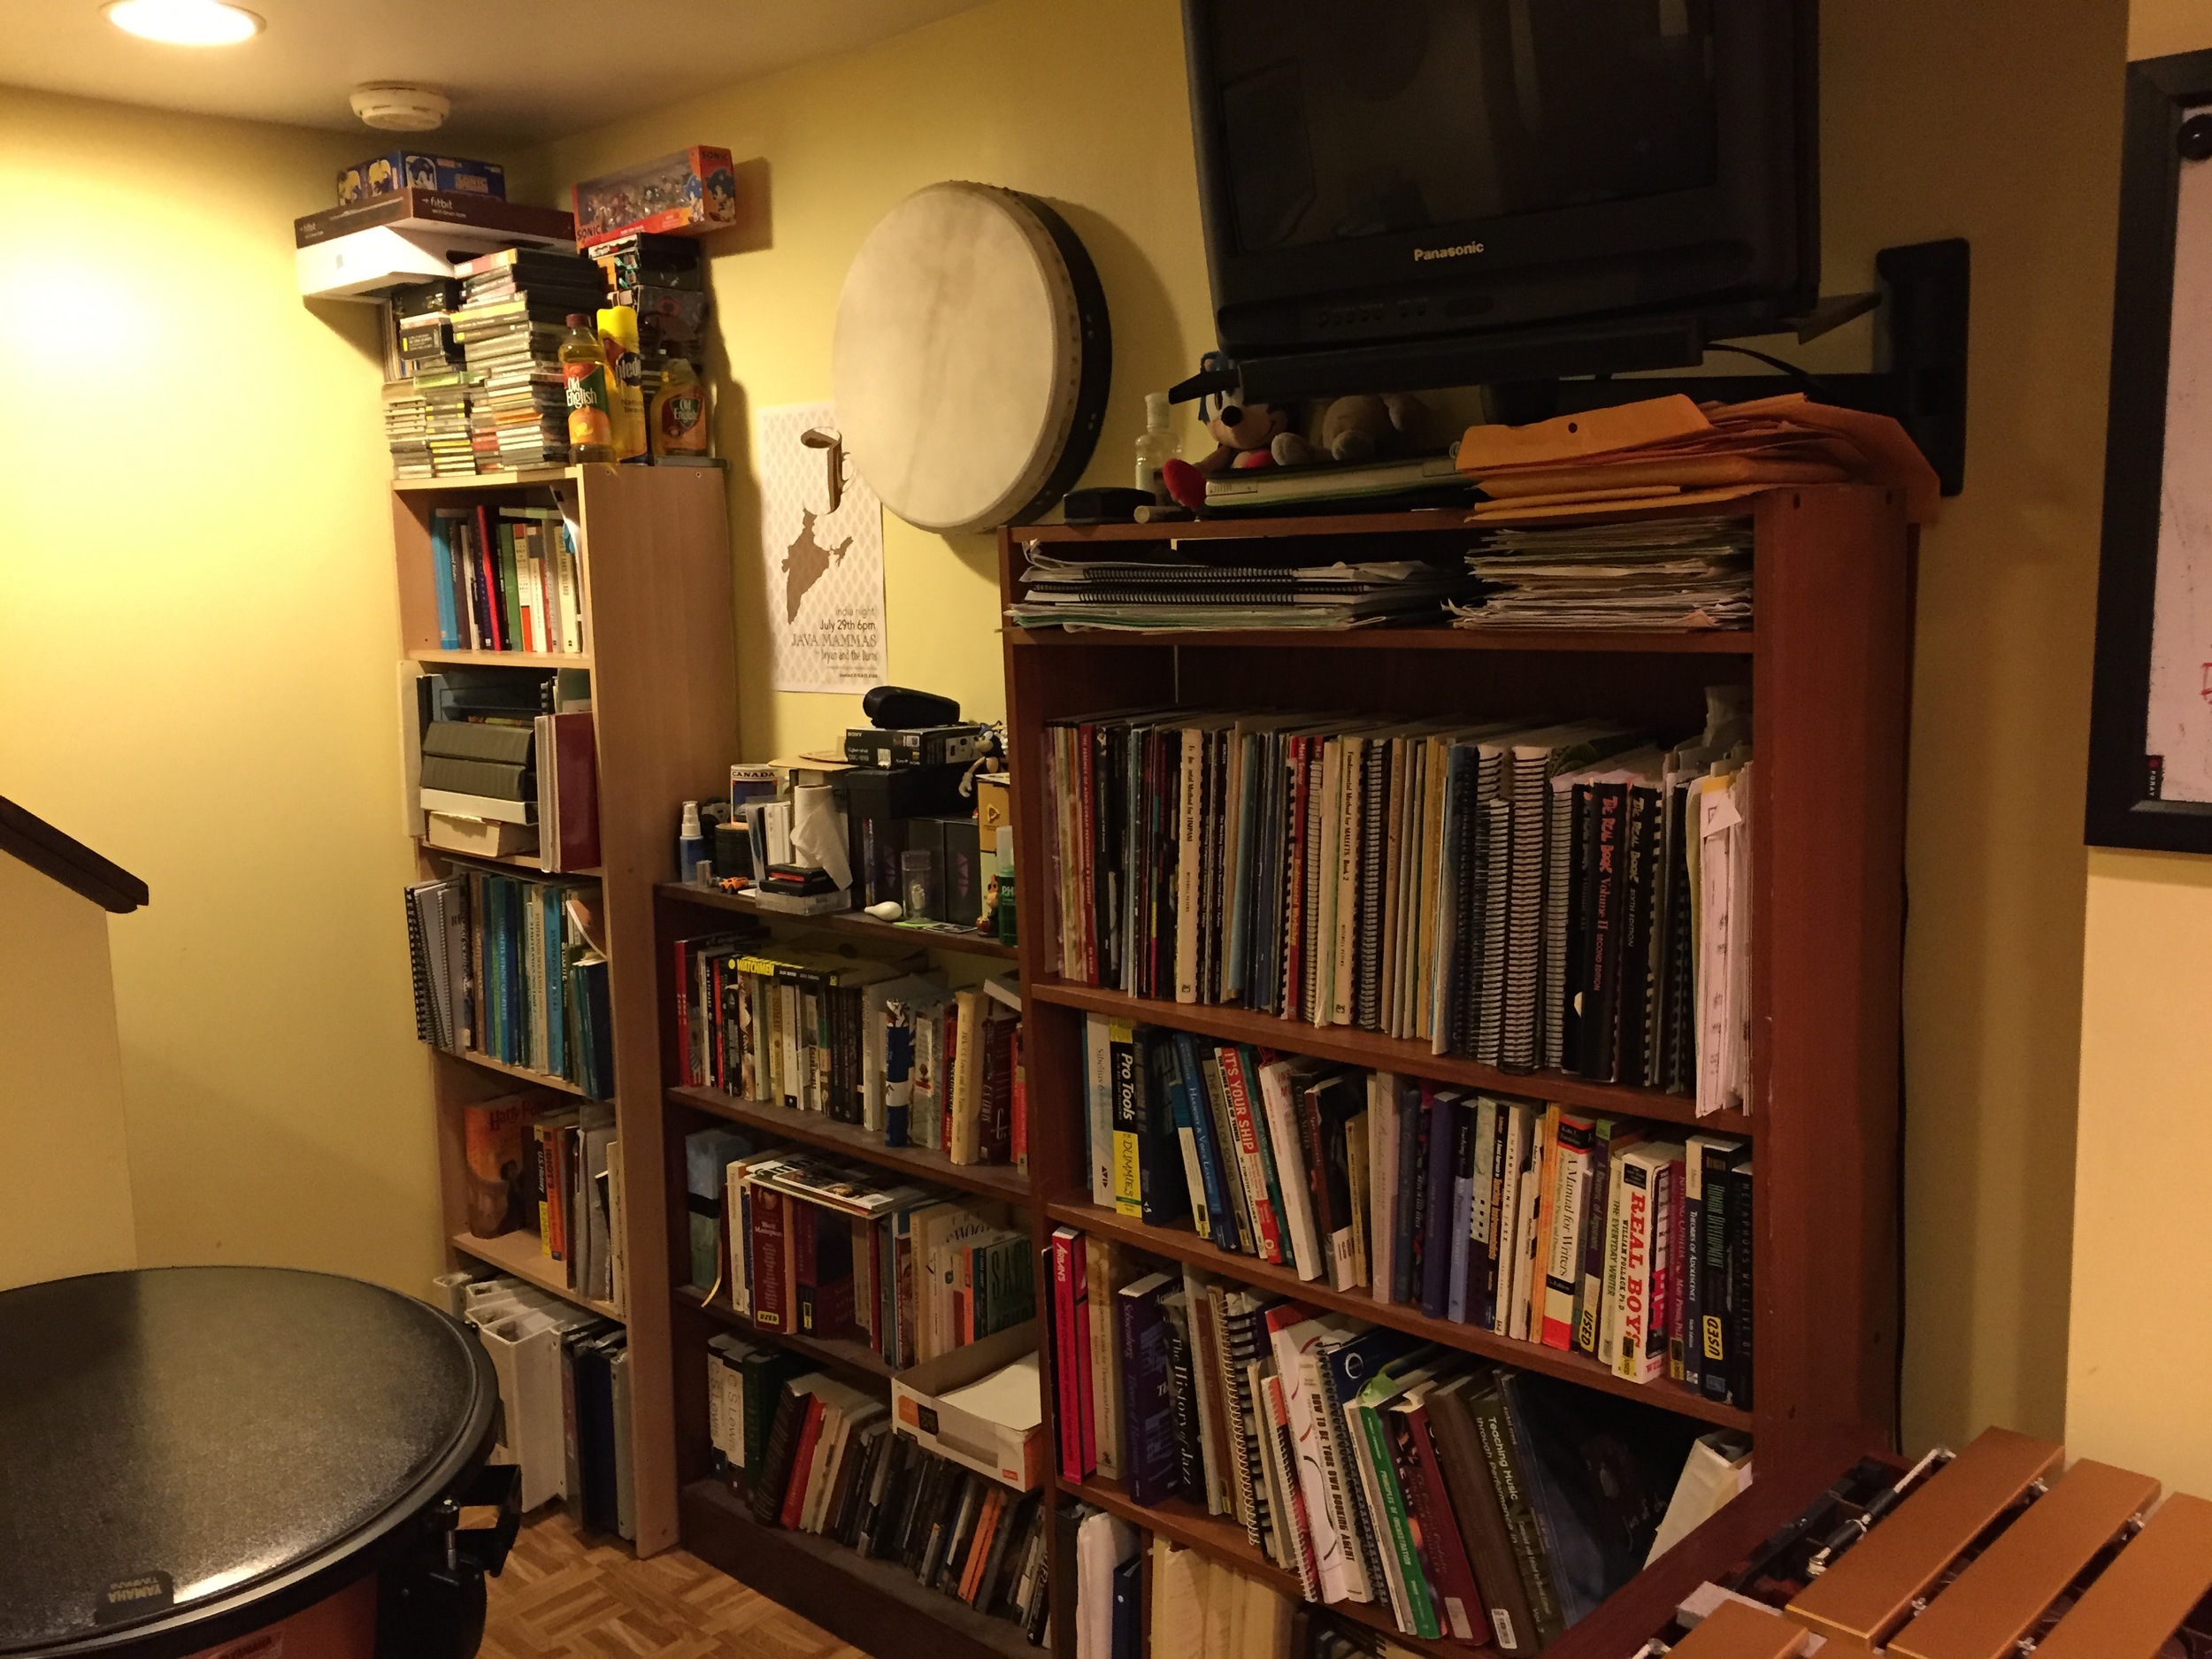 Studio library of recordings and books